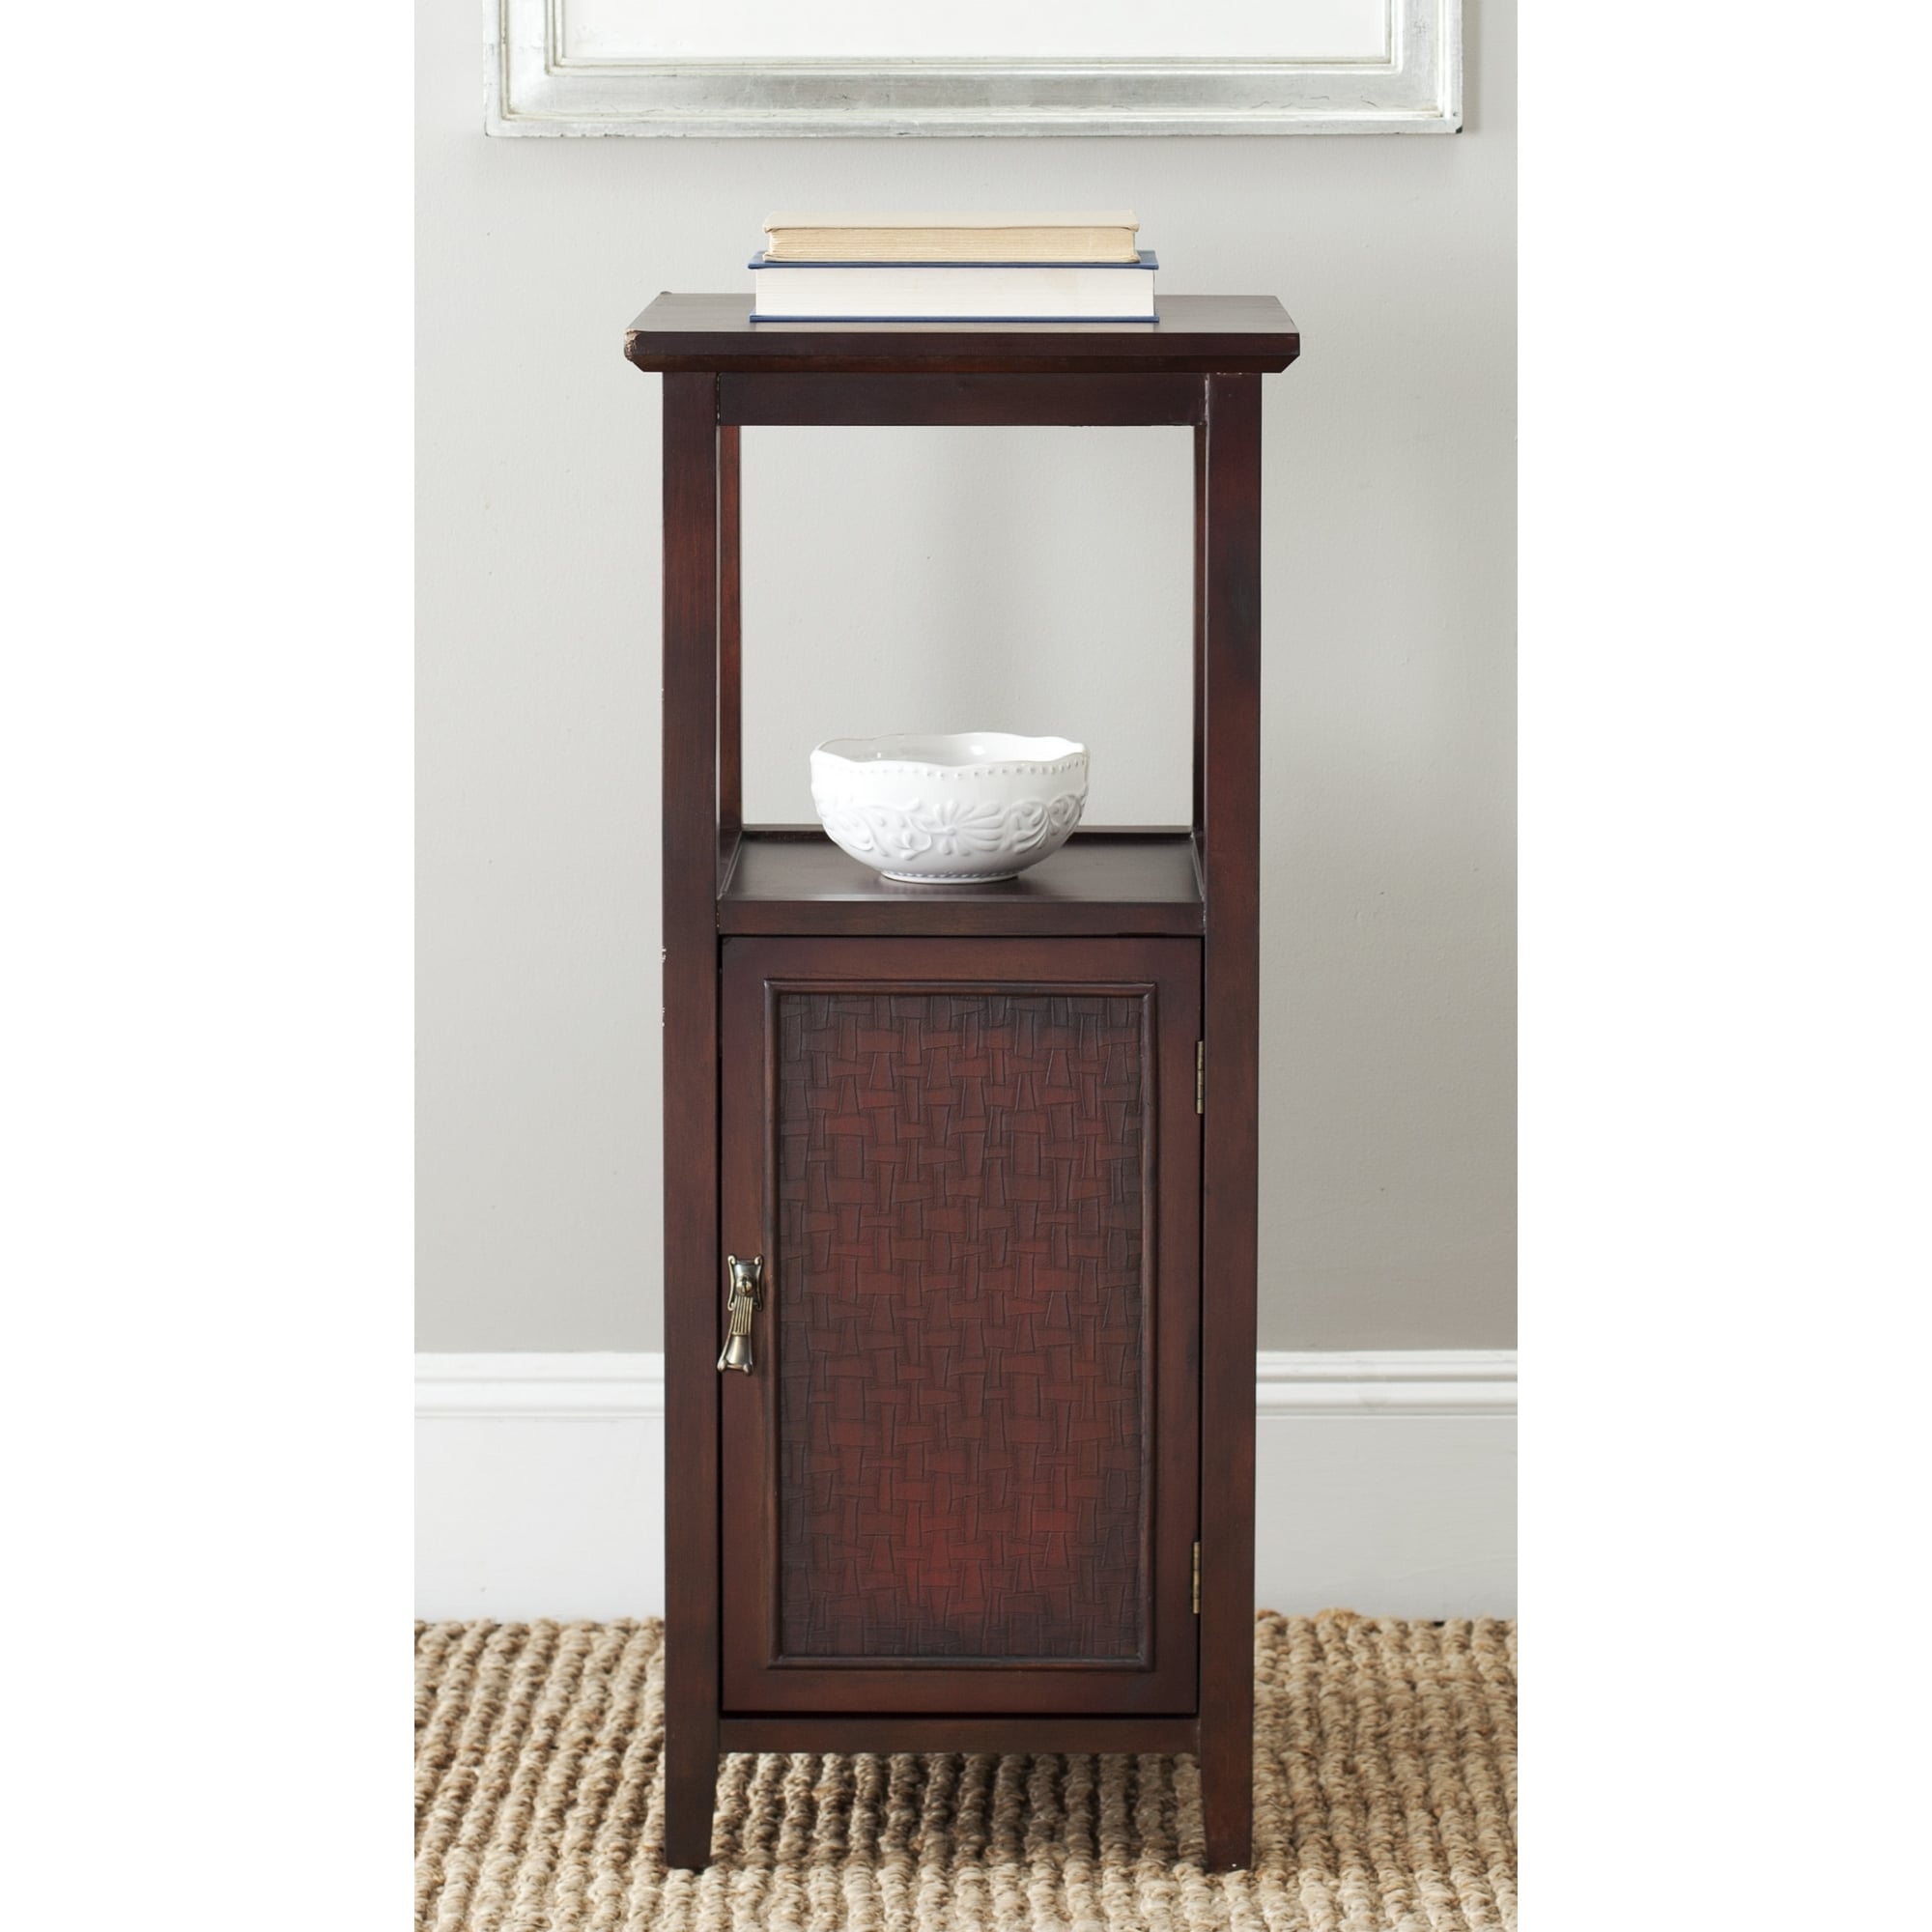 Mike Dark Brown Side Table Today $180.99 Sale $162.89 Save 10%